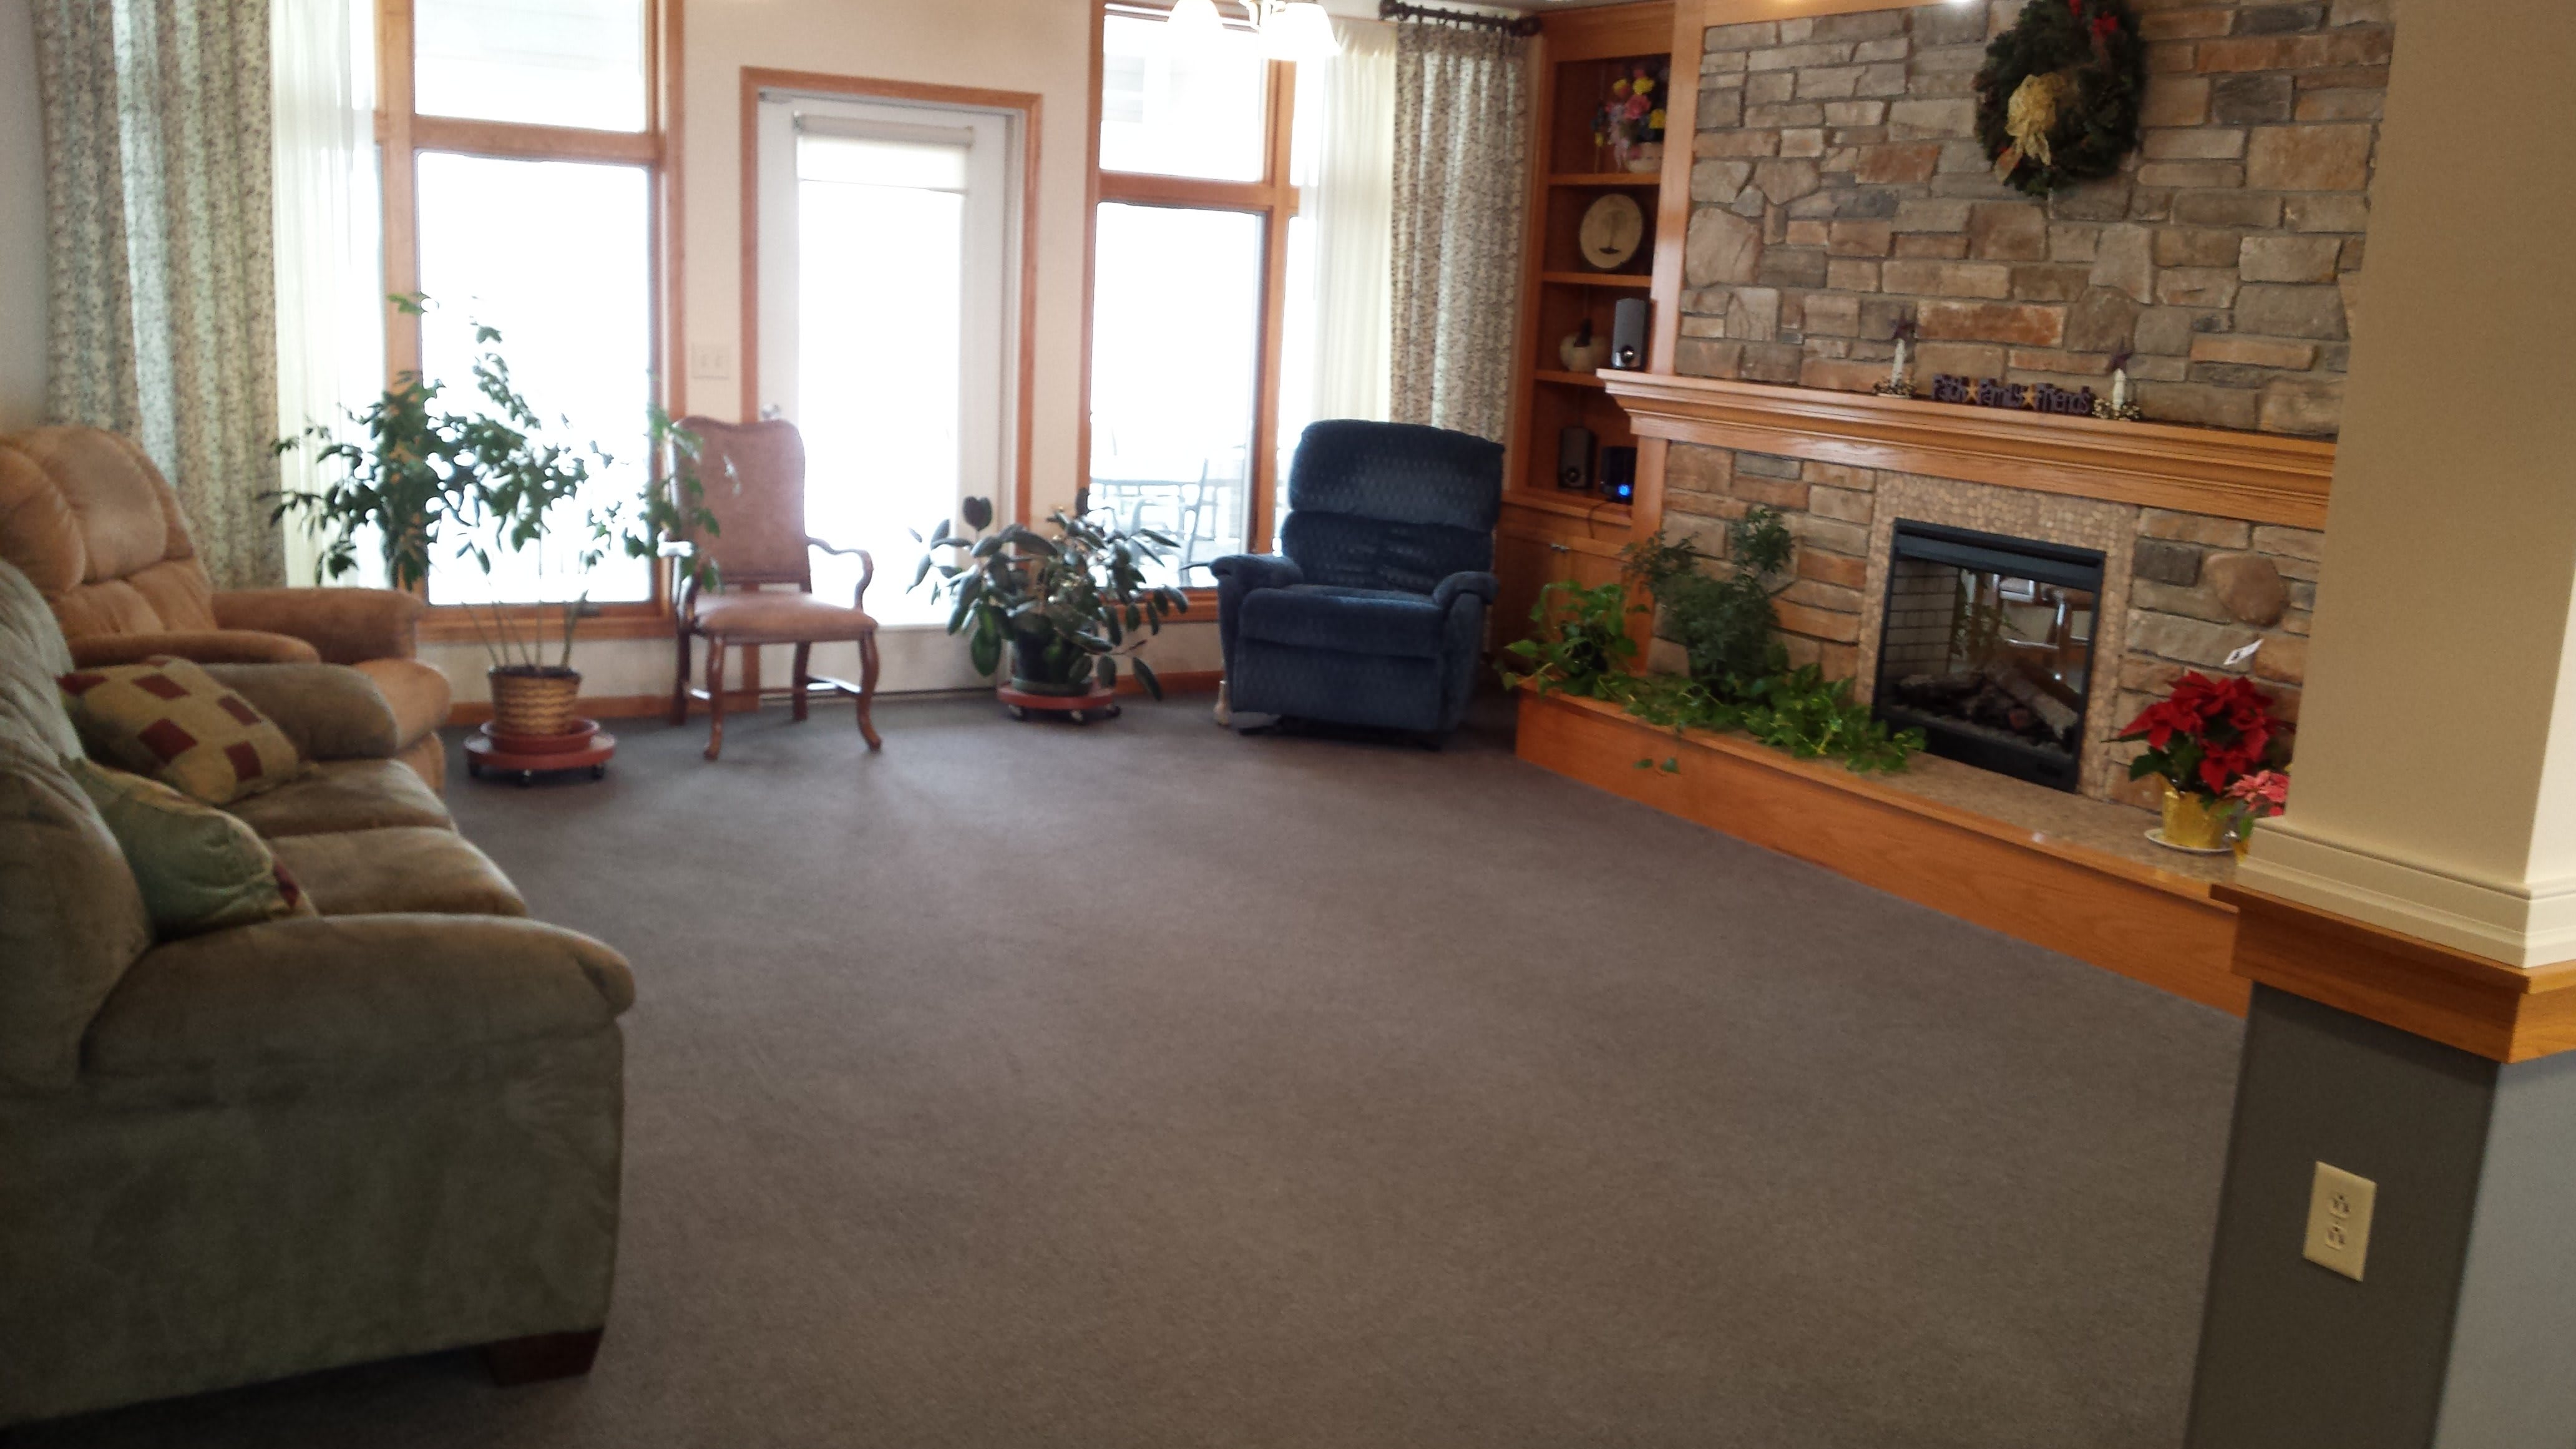 Whispering Willow Assisted Living&Memory Wing indoor common area